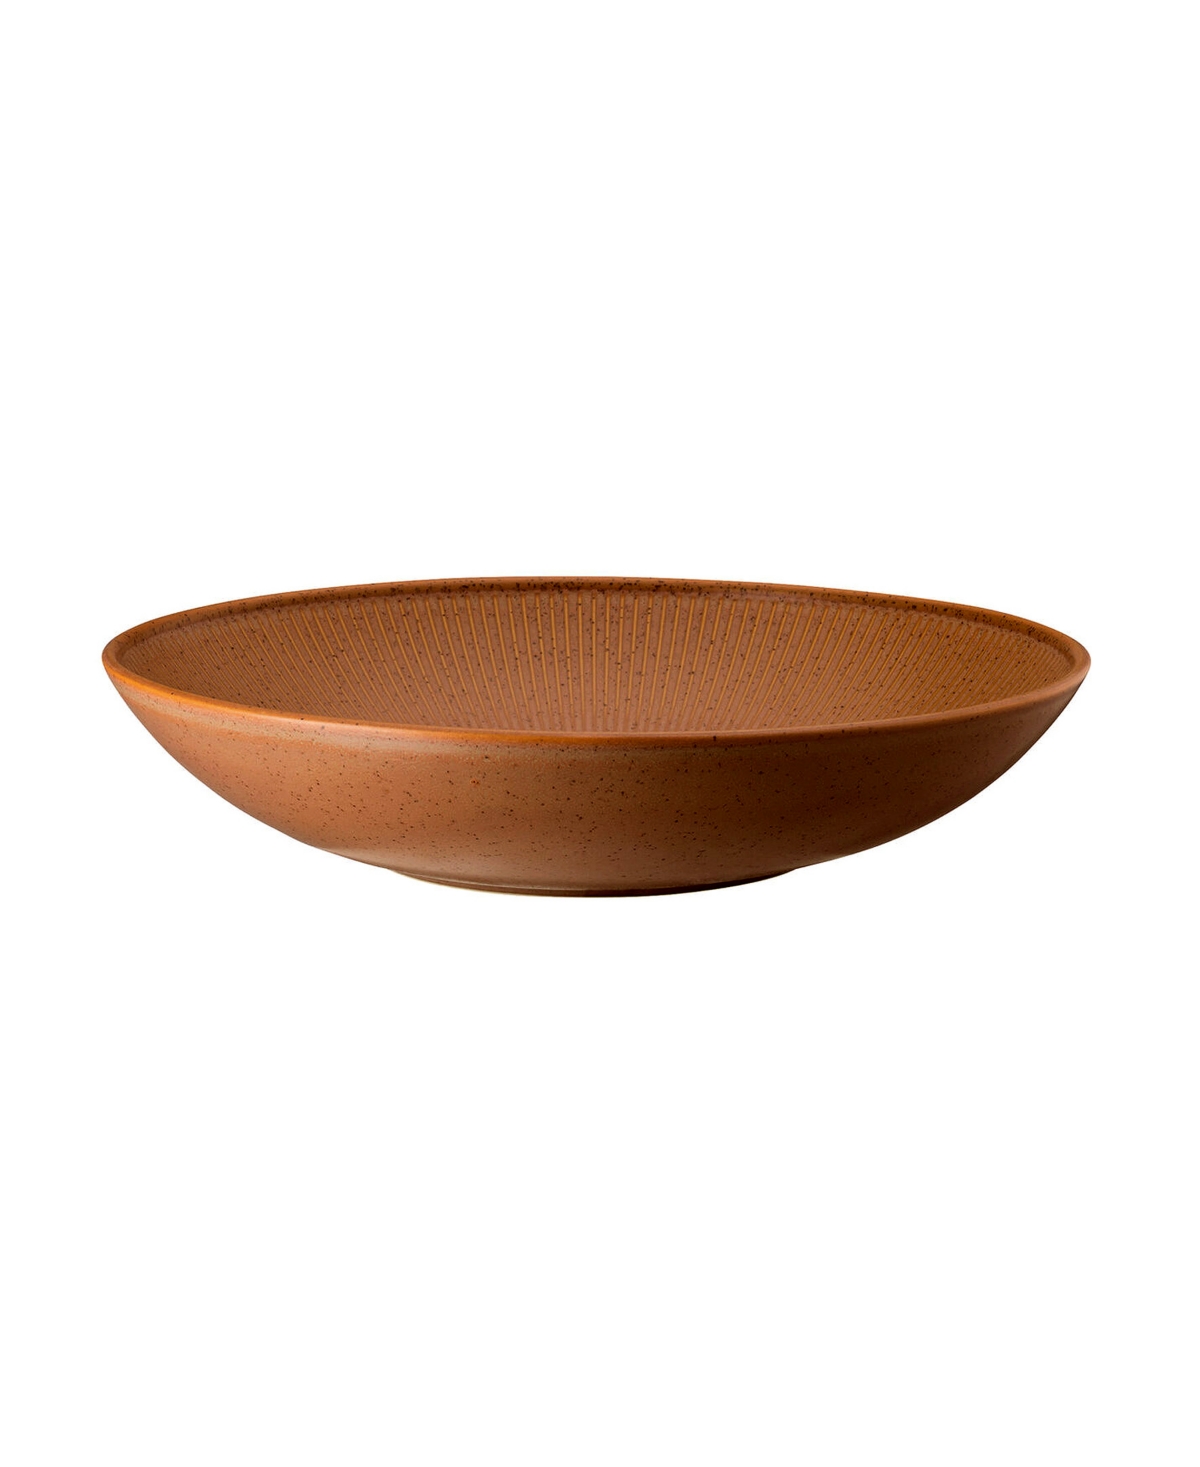 Rosenthal Clay 11" Platter In Earth